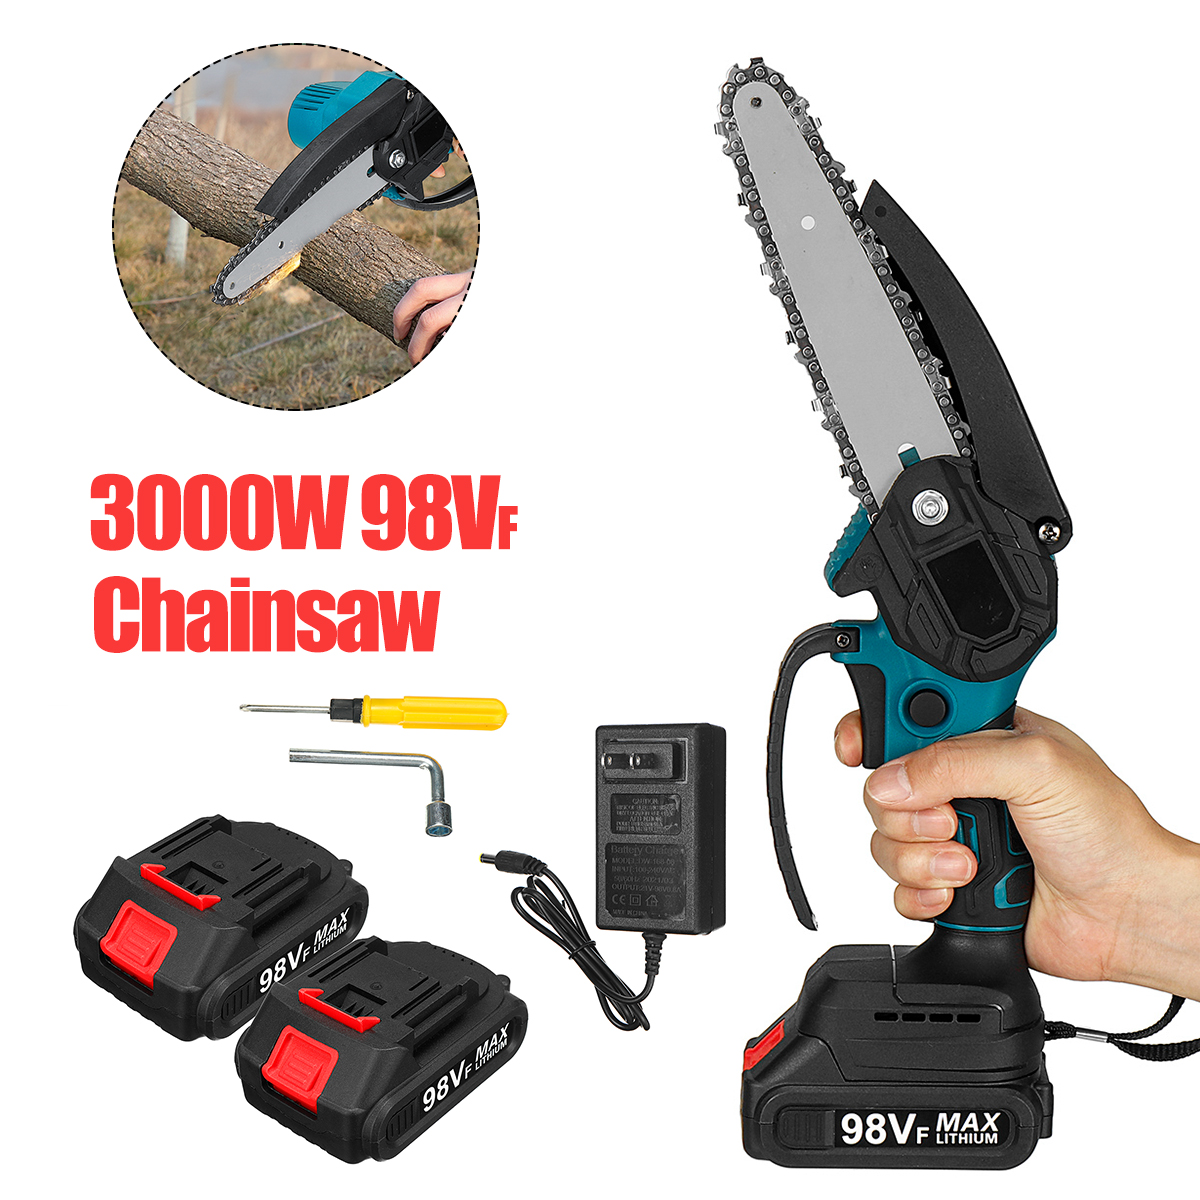 6-Inch-98VF-3000W-10000rpm-Mini-Electric-Chainsaw-Battery-Indicator-Portable-Woodworking-Wood-Cutter-1858363-7